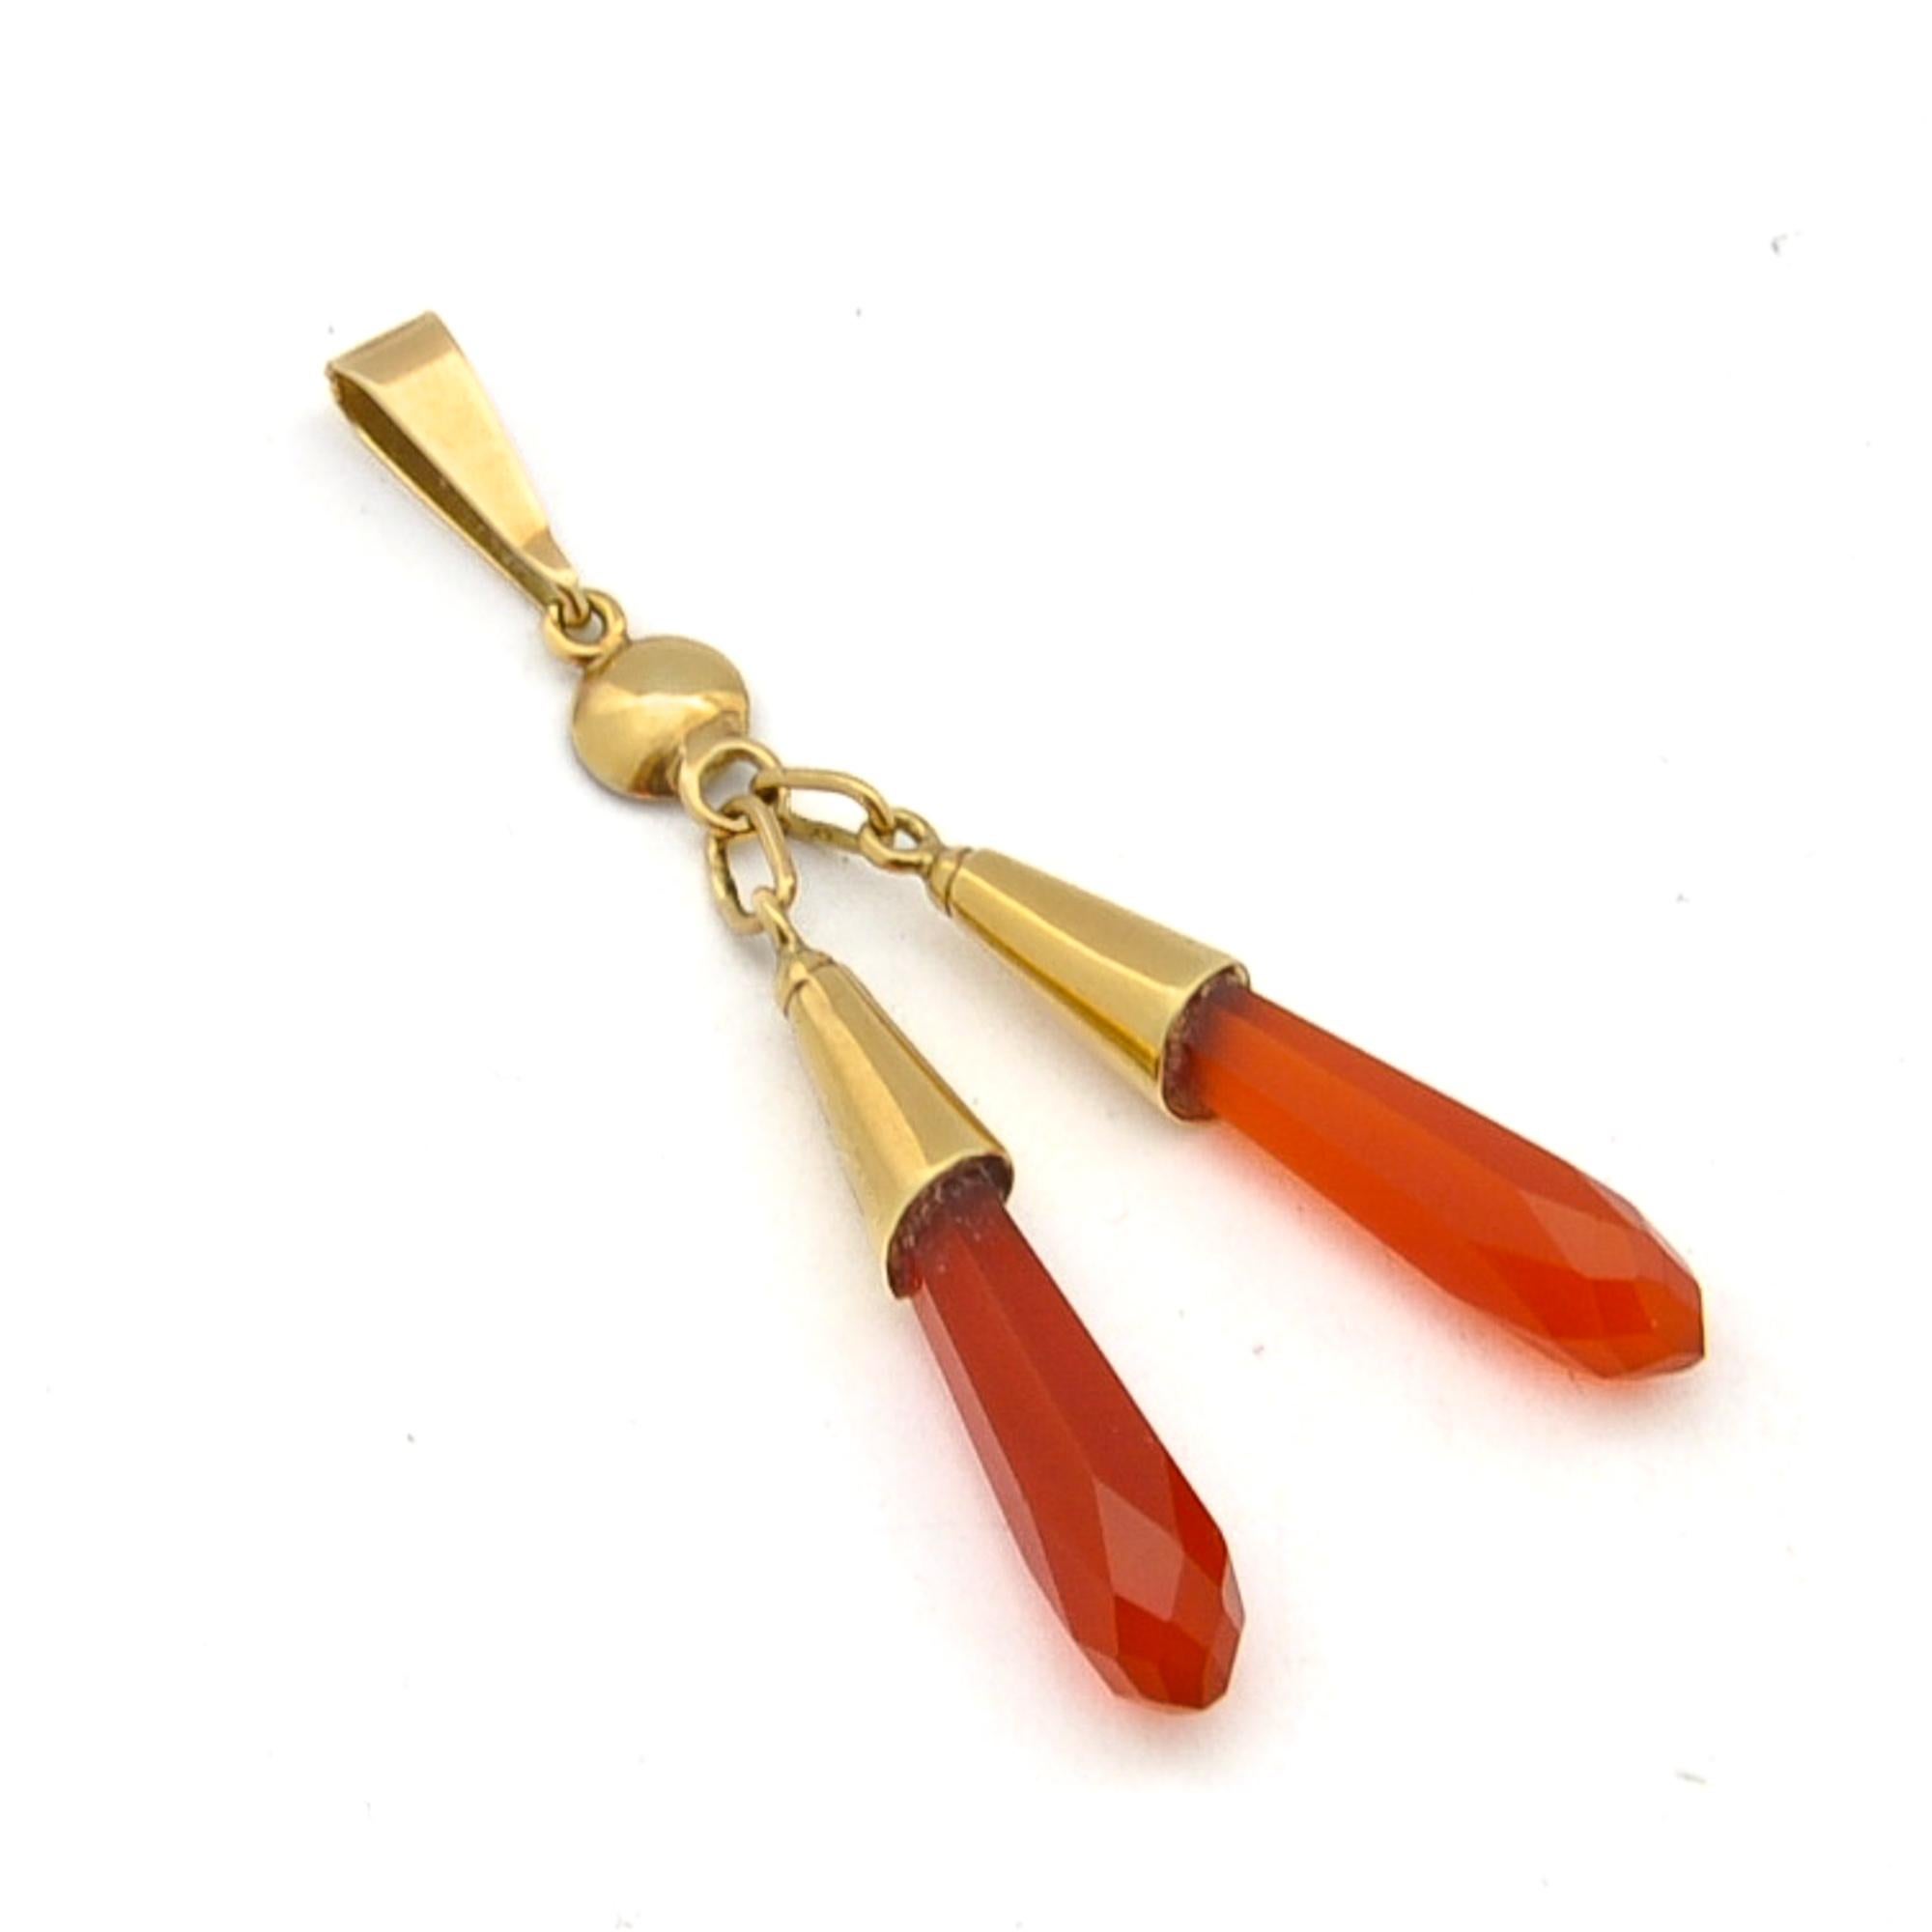 This gold pendant is set with two beautiful hexagon pointed carnelian crystals. The translucent and clear red orangish faceted carnelian stones are set in gold caps and swing freely. The two carnelian pendants are hold together by another bail above